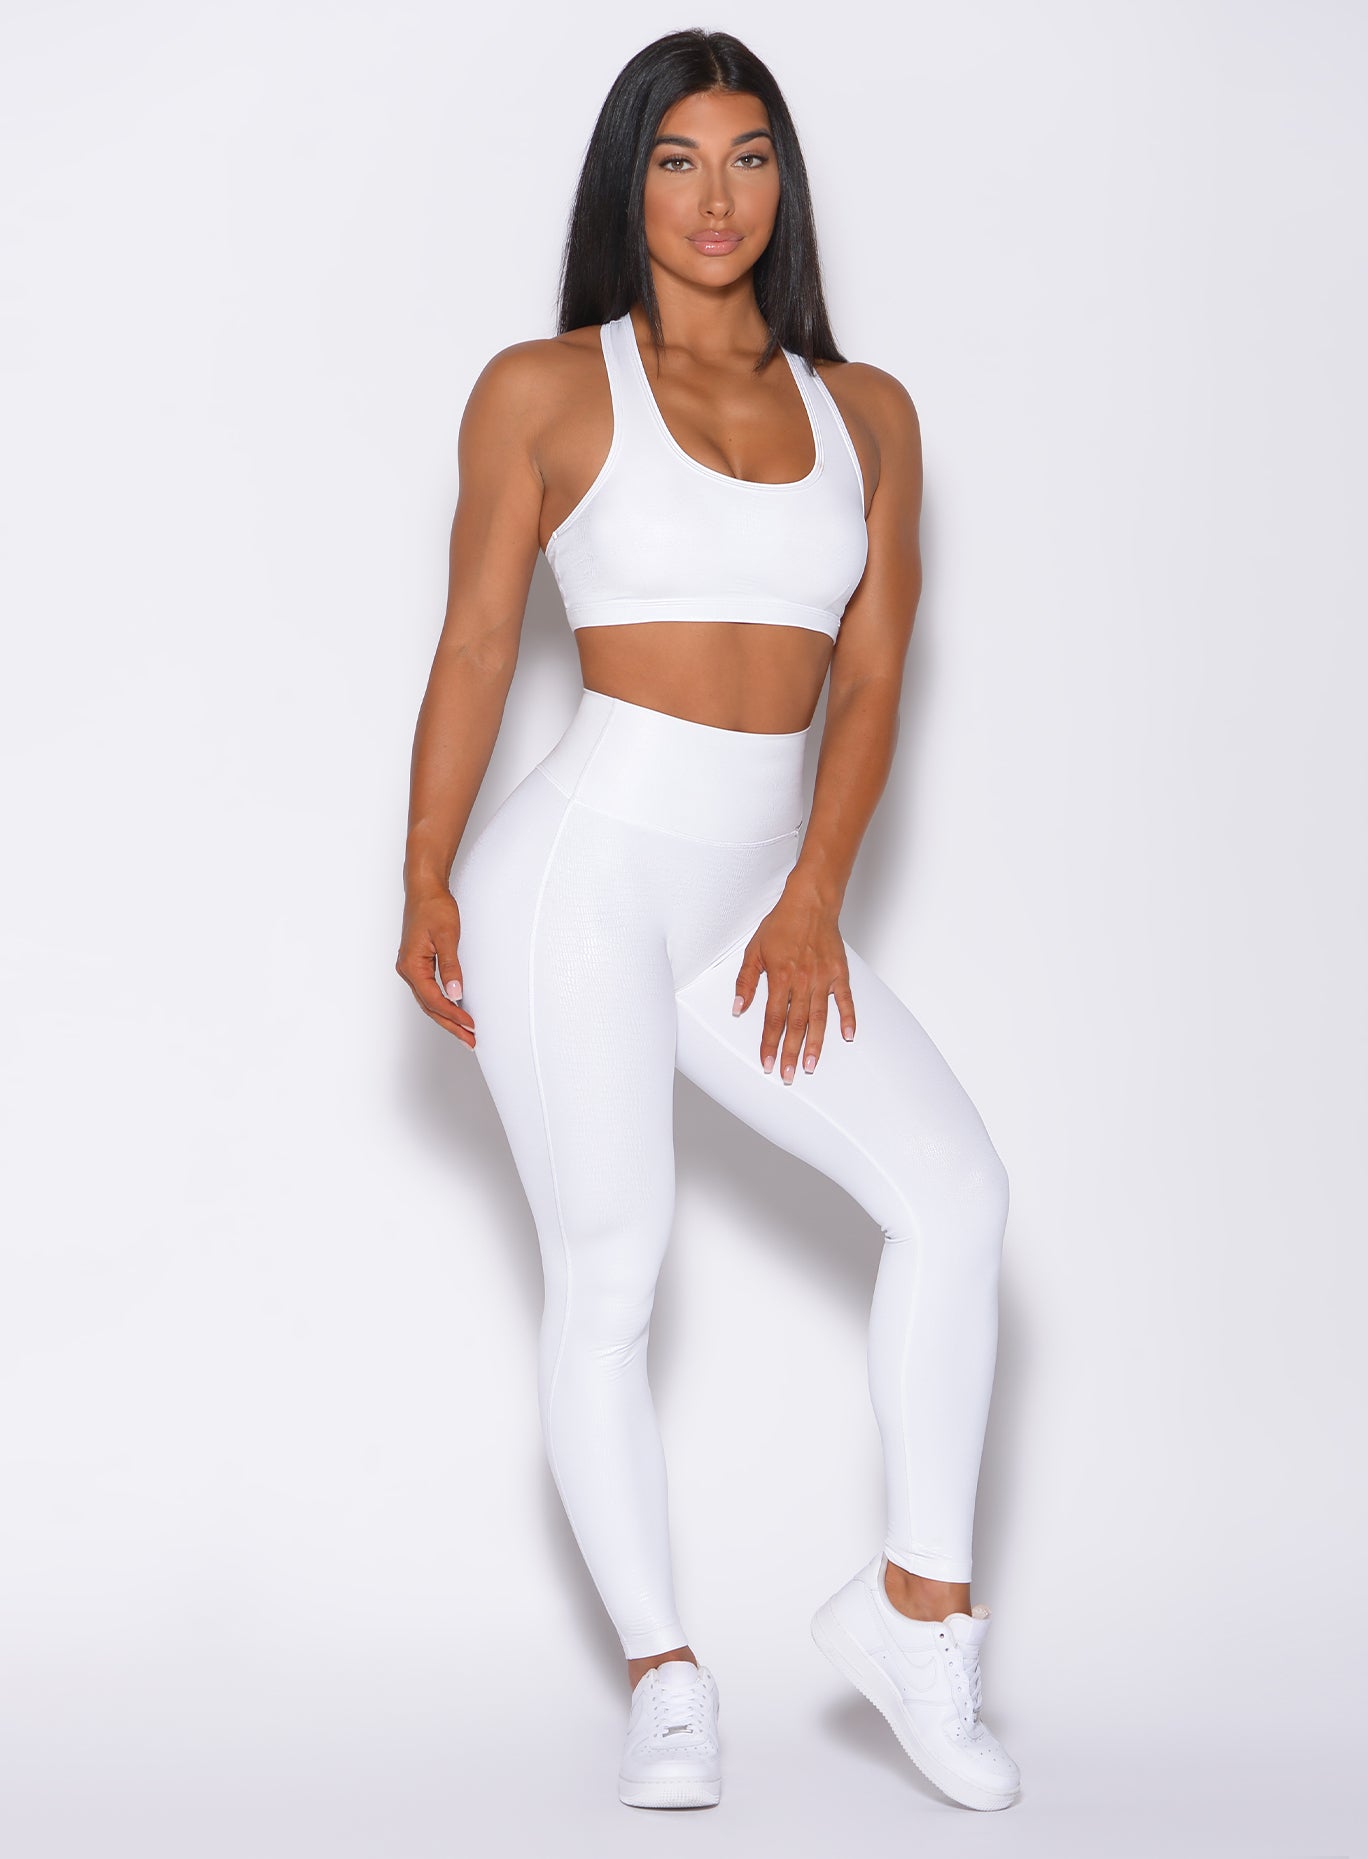 Front profile view of a model facing forward wearing our shine leggings in white python color and a matching bra